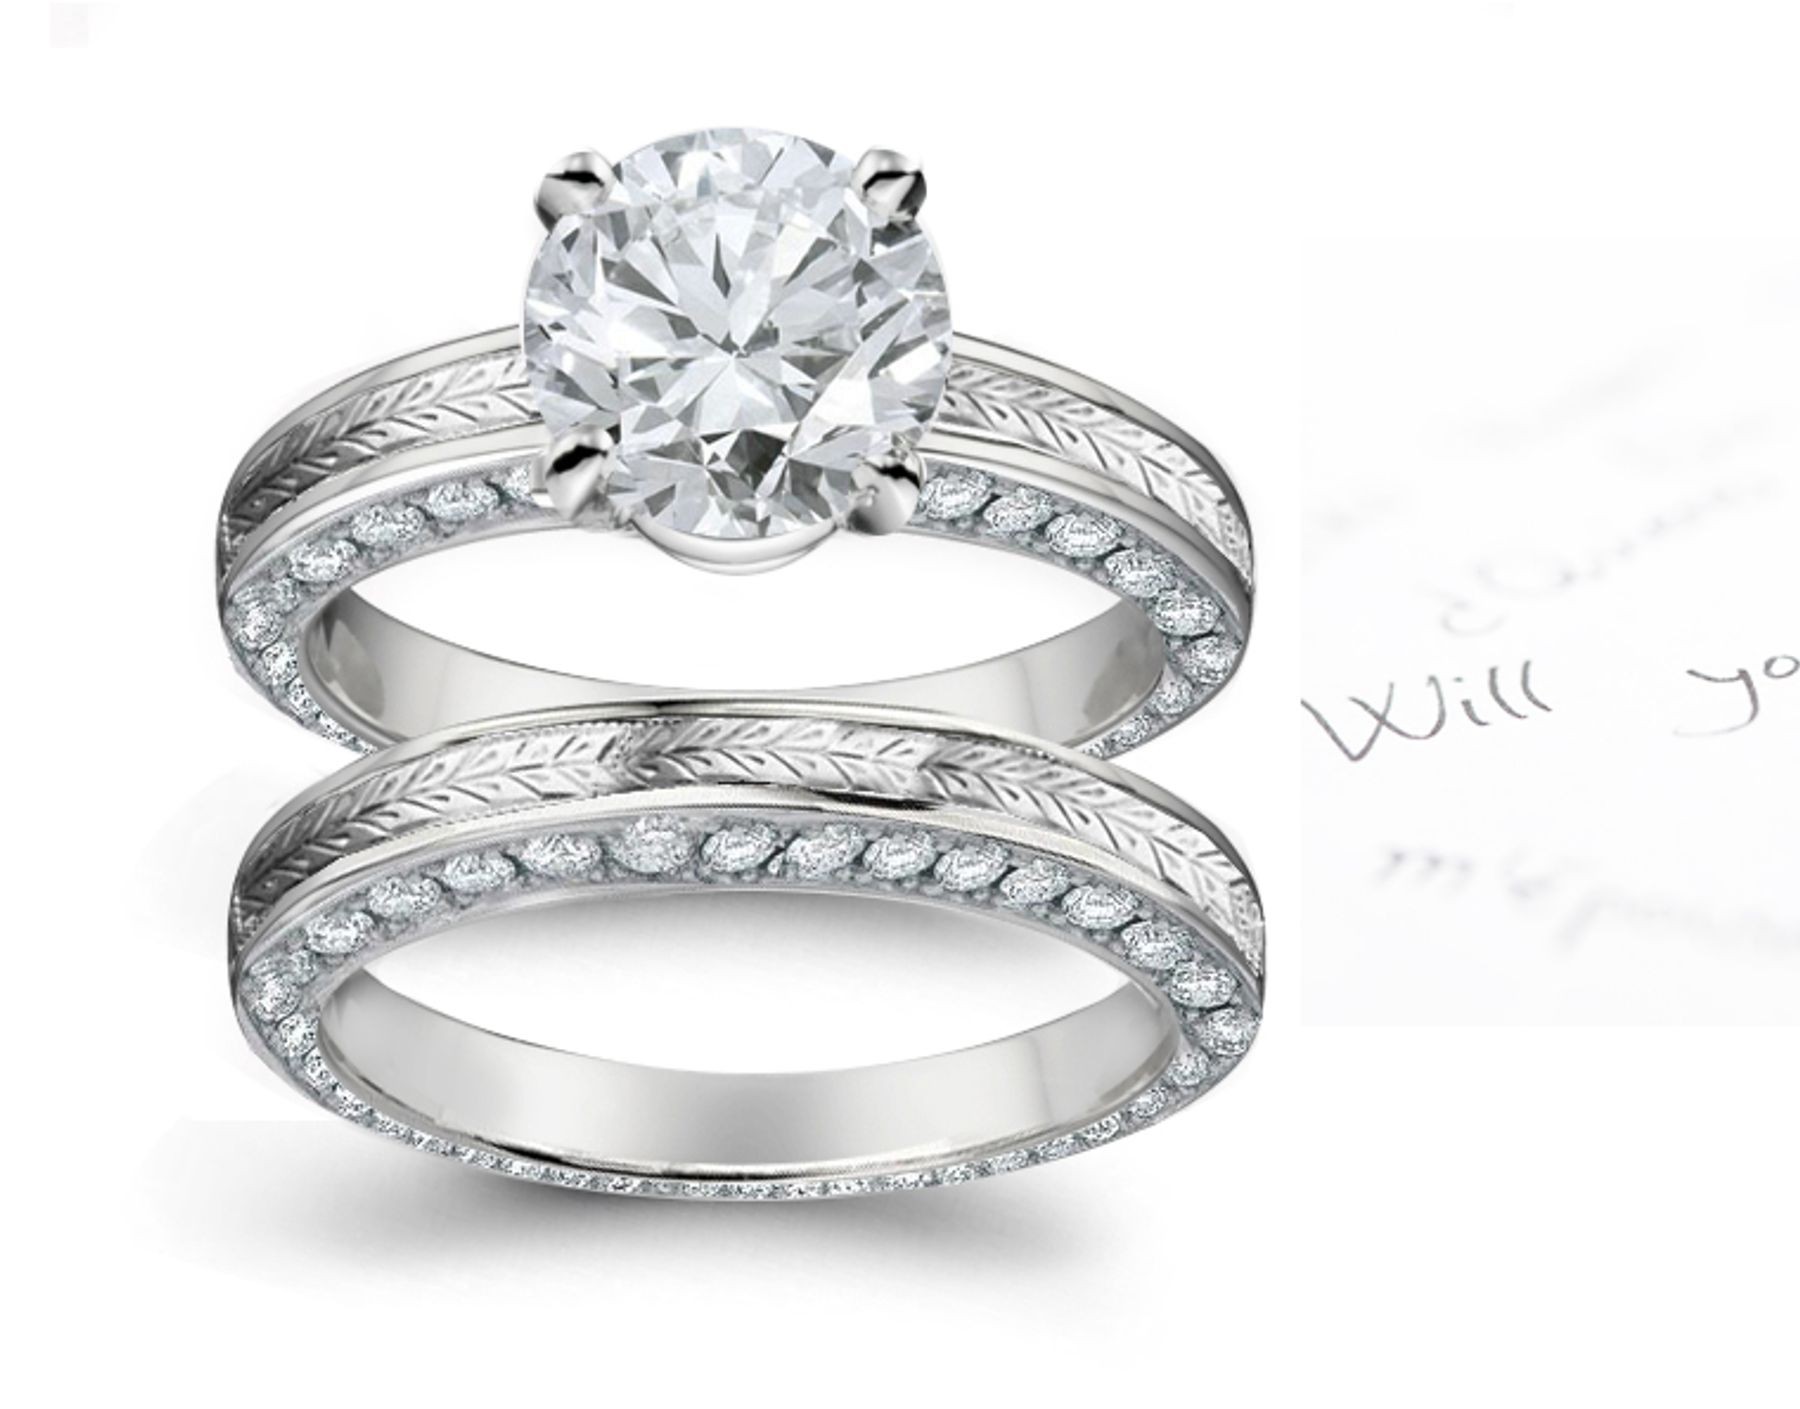 Special Design Platinum, & Diamond Ring with Floral Scrolls & Motifs Shoulders & Diamond Halo Gold Sides